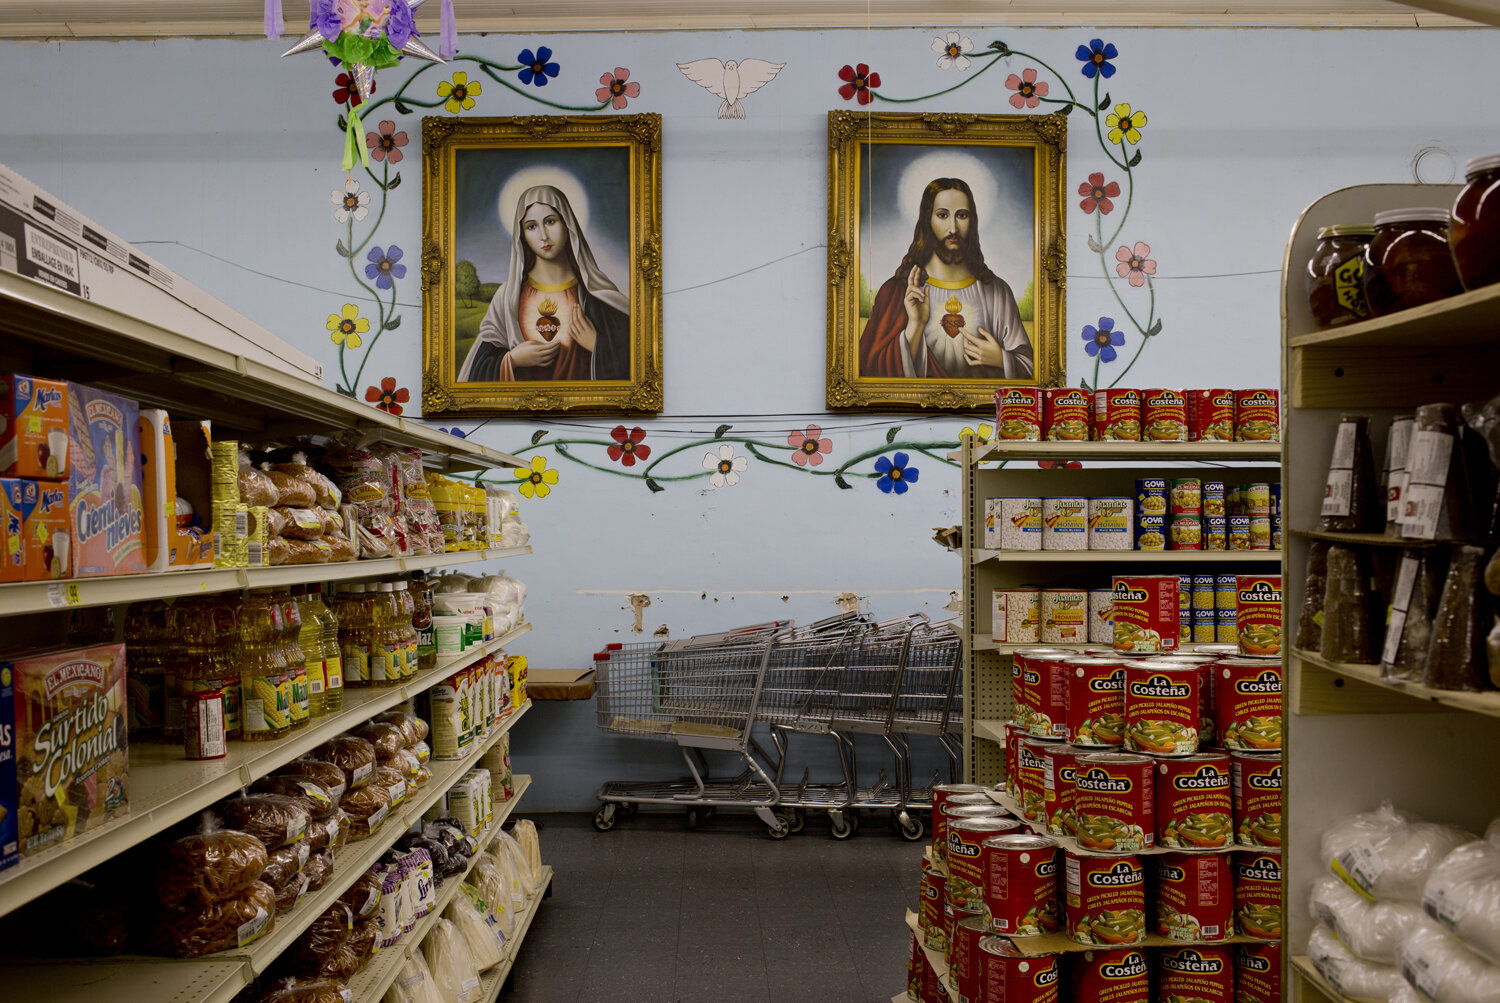   Mexican Grocery. Albertville, AL , 2013 Edition: 1/5 Archival Pigment Print 20 × 30 in. (image size) The Do Good Fund, Inc., 2016-073 